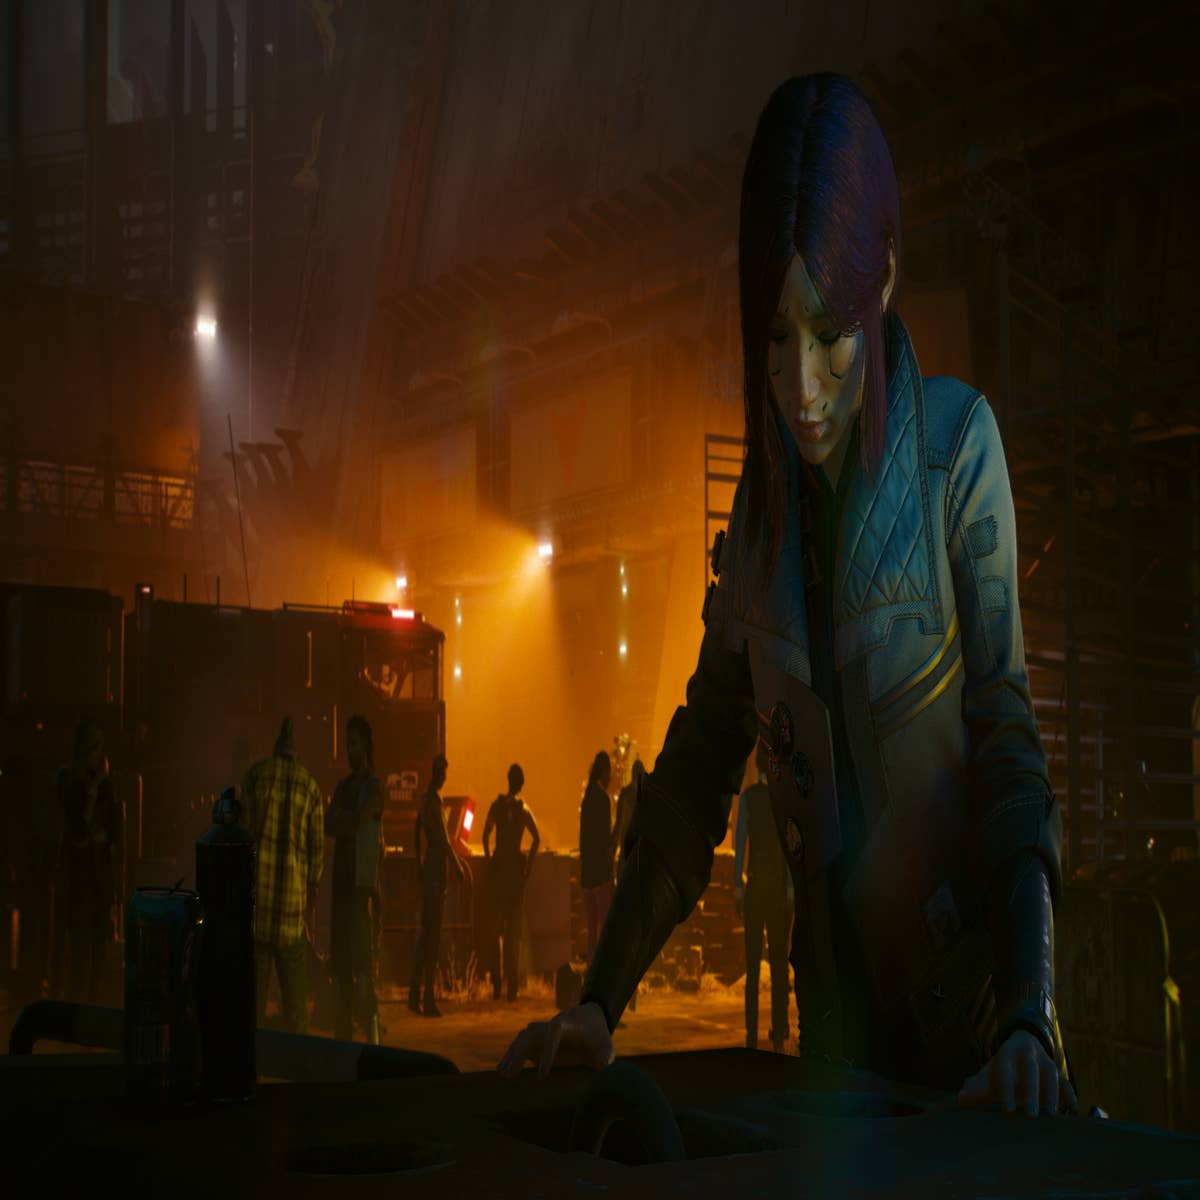 Cyberpunk 2077: Phantom Liberty takes players through treacherous quests to  unlock a new city and ending - Epic Games Store